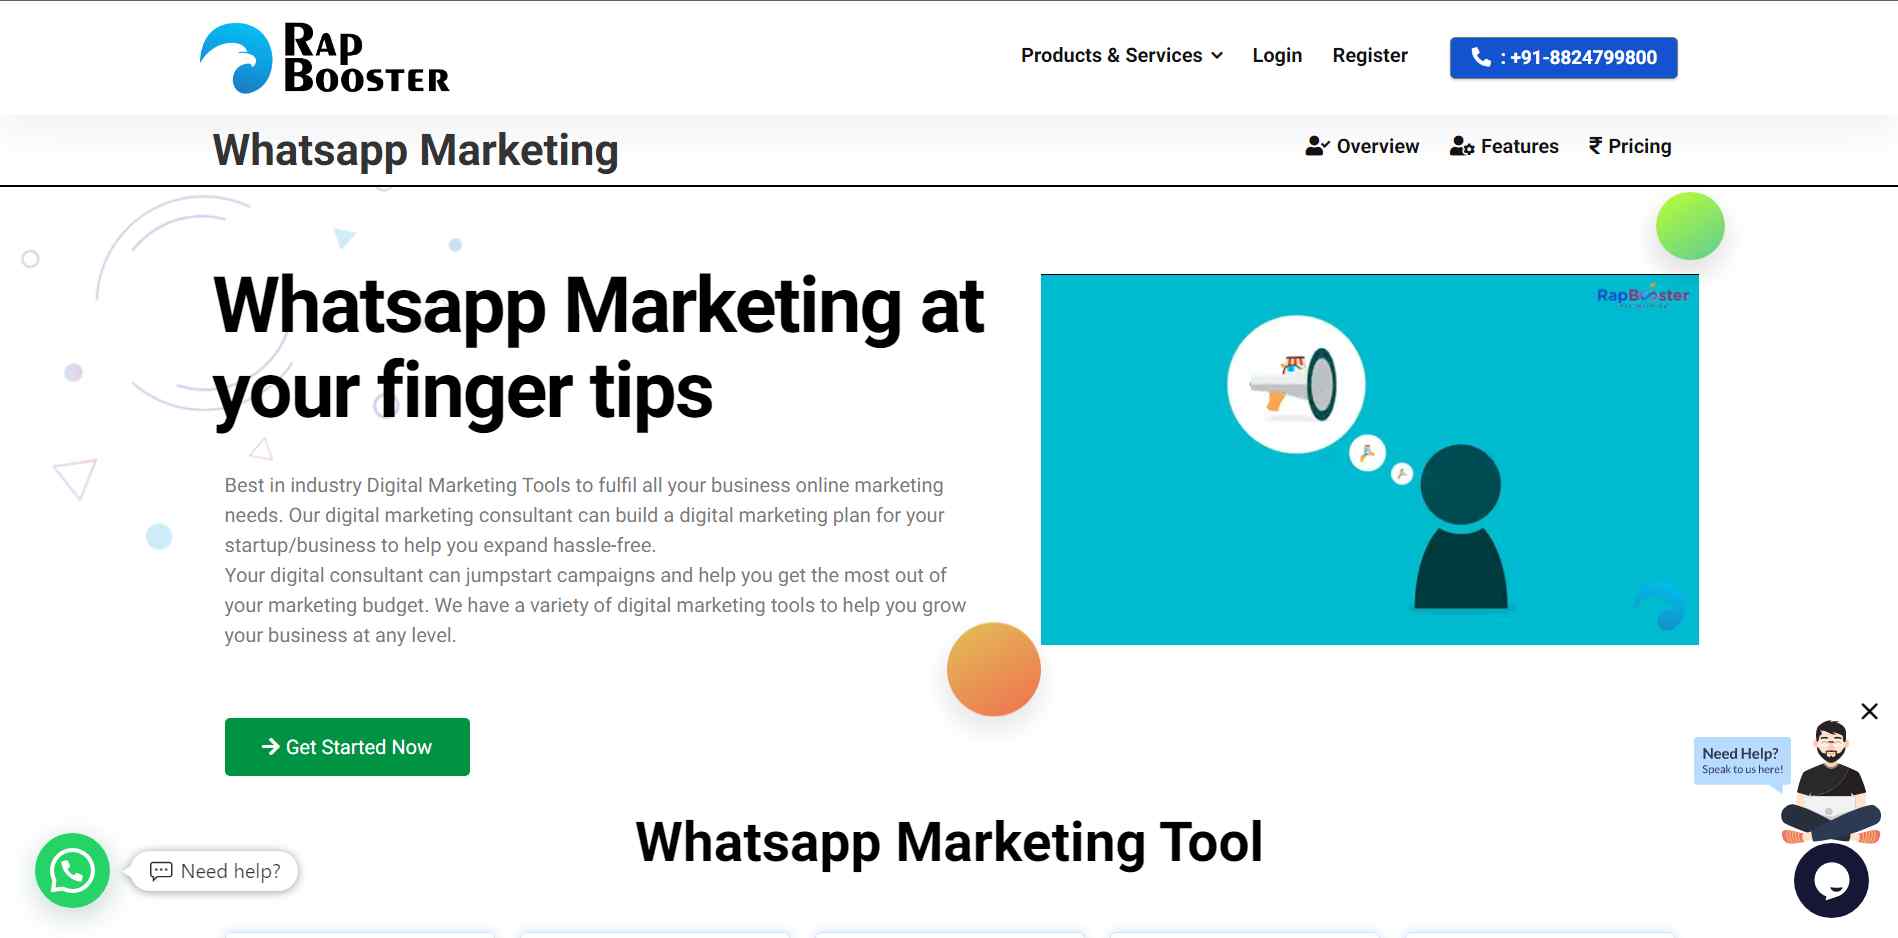 RapBooster Pro is cutting-edge marketing software for WhatsApp that helps businesses communicate with customers quickly and effectively.